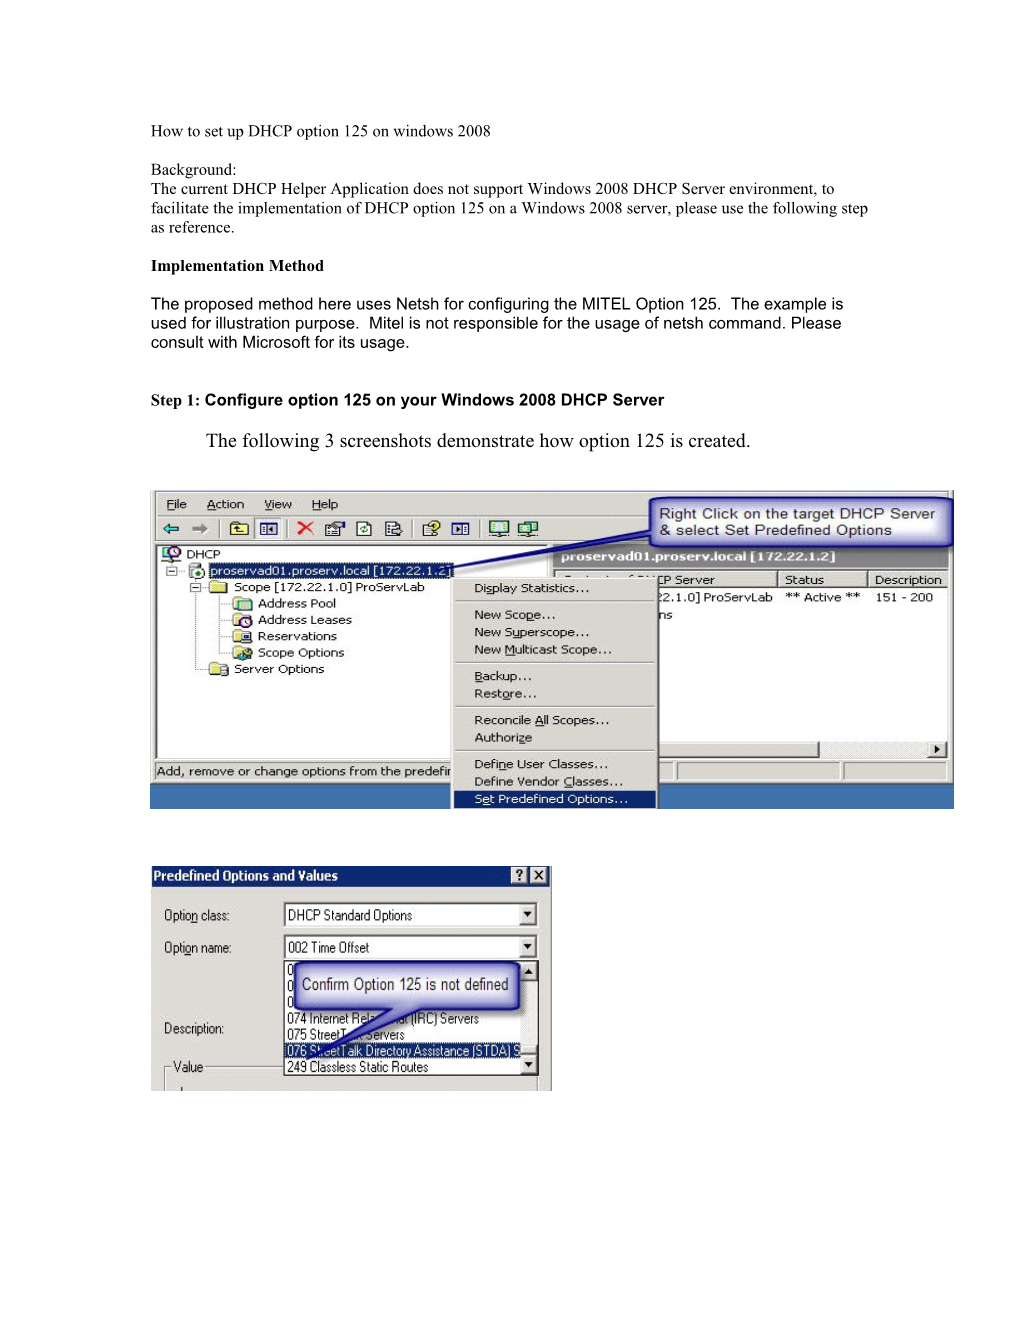 How to Set up DHCP Option 125 on Windows 2008